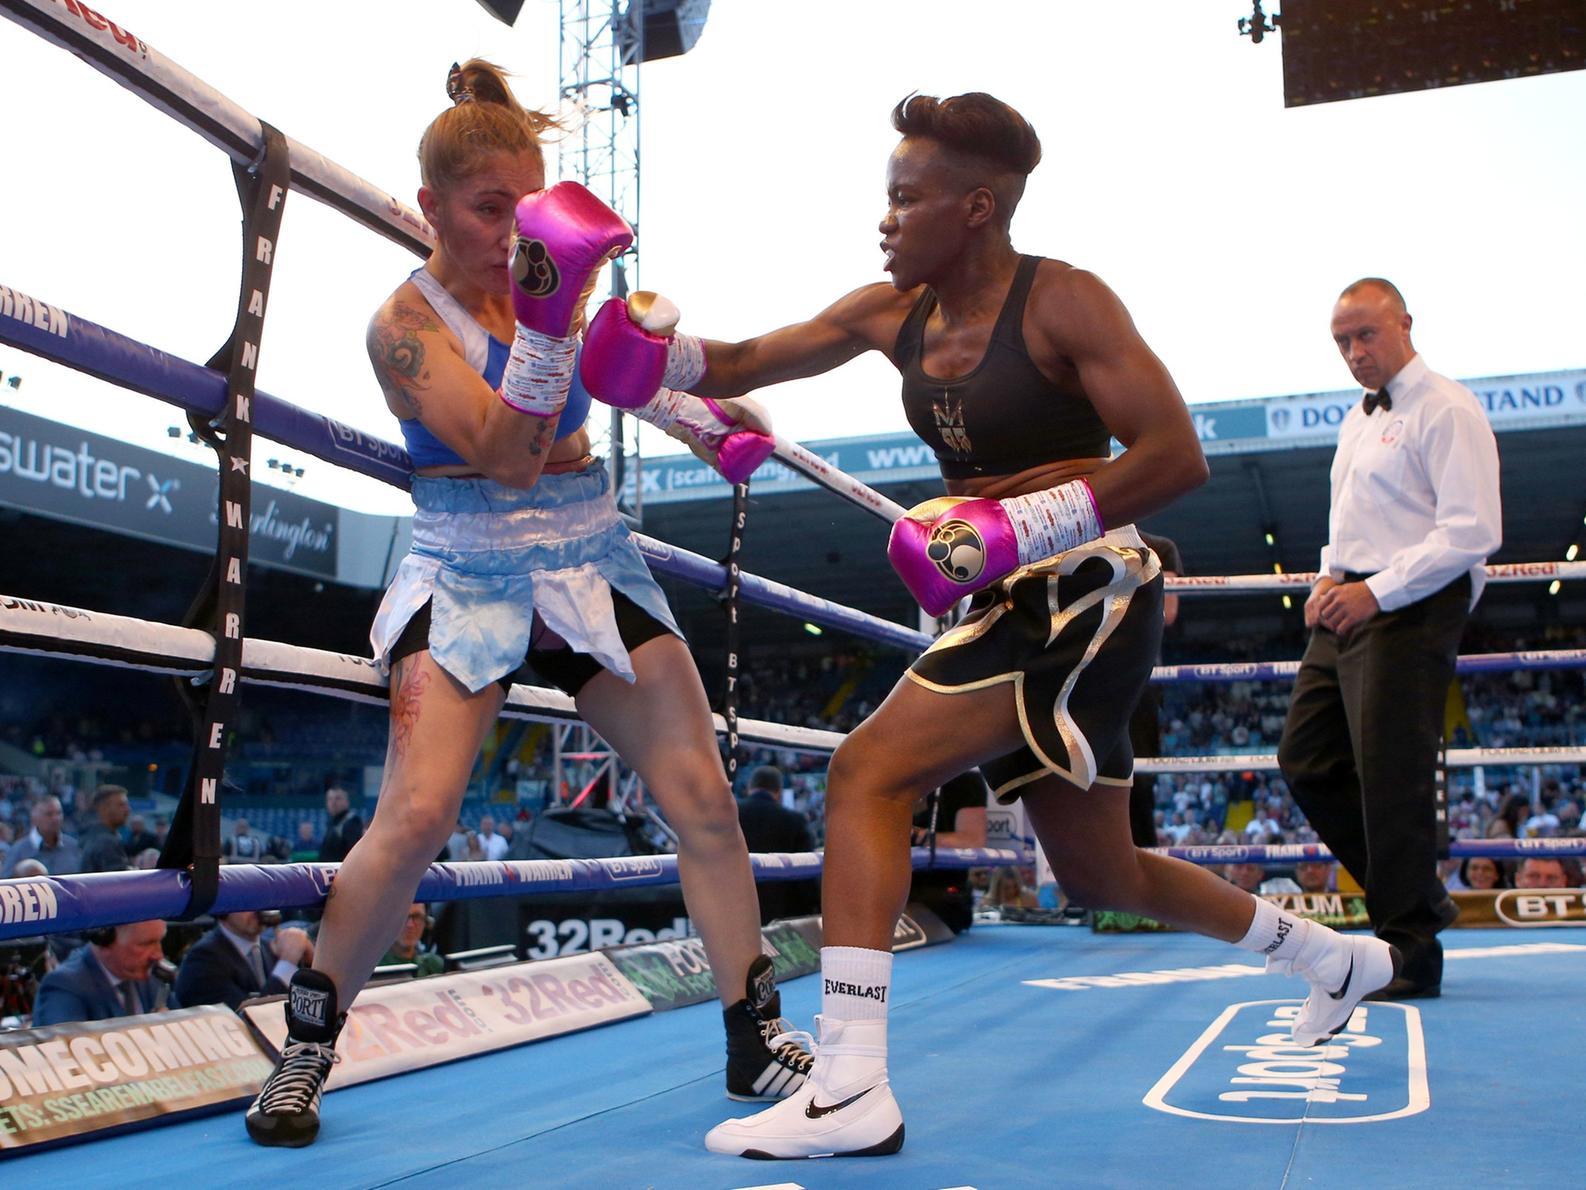 Nicola Adams (right) in action against Soledad Del Valle Frias during their International Flyweight bout at Elland Road, Leeds, May 2018. Photo credit: Dave Thompson/PA Wire.